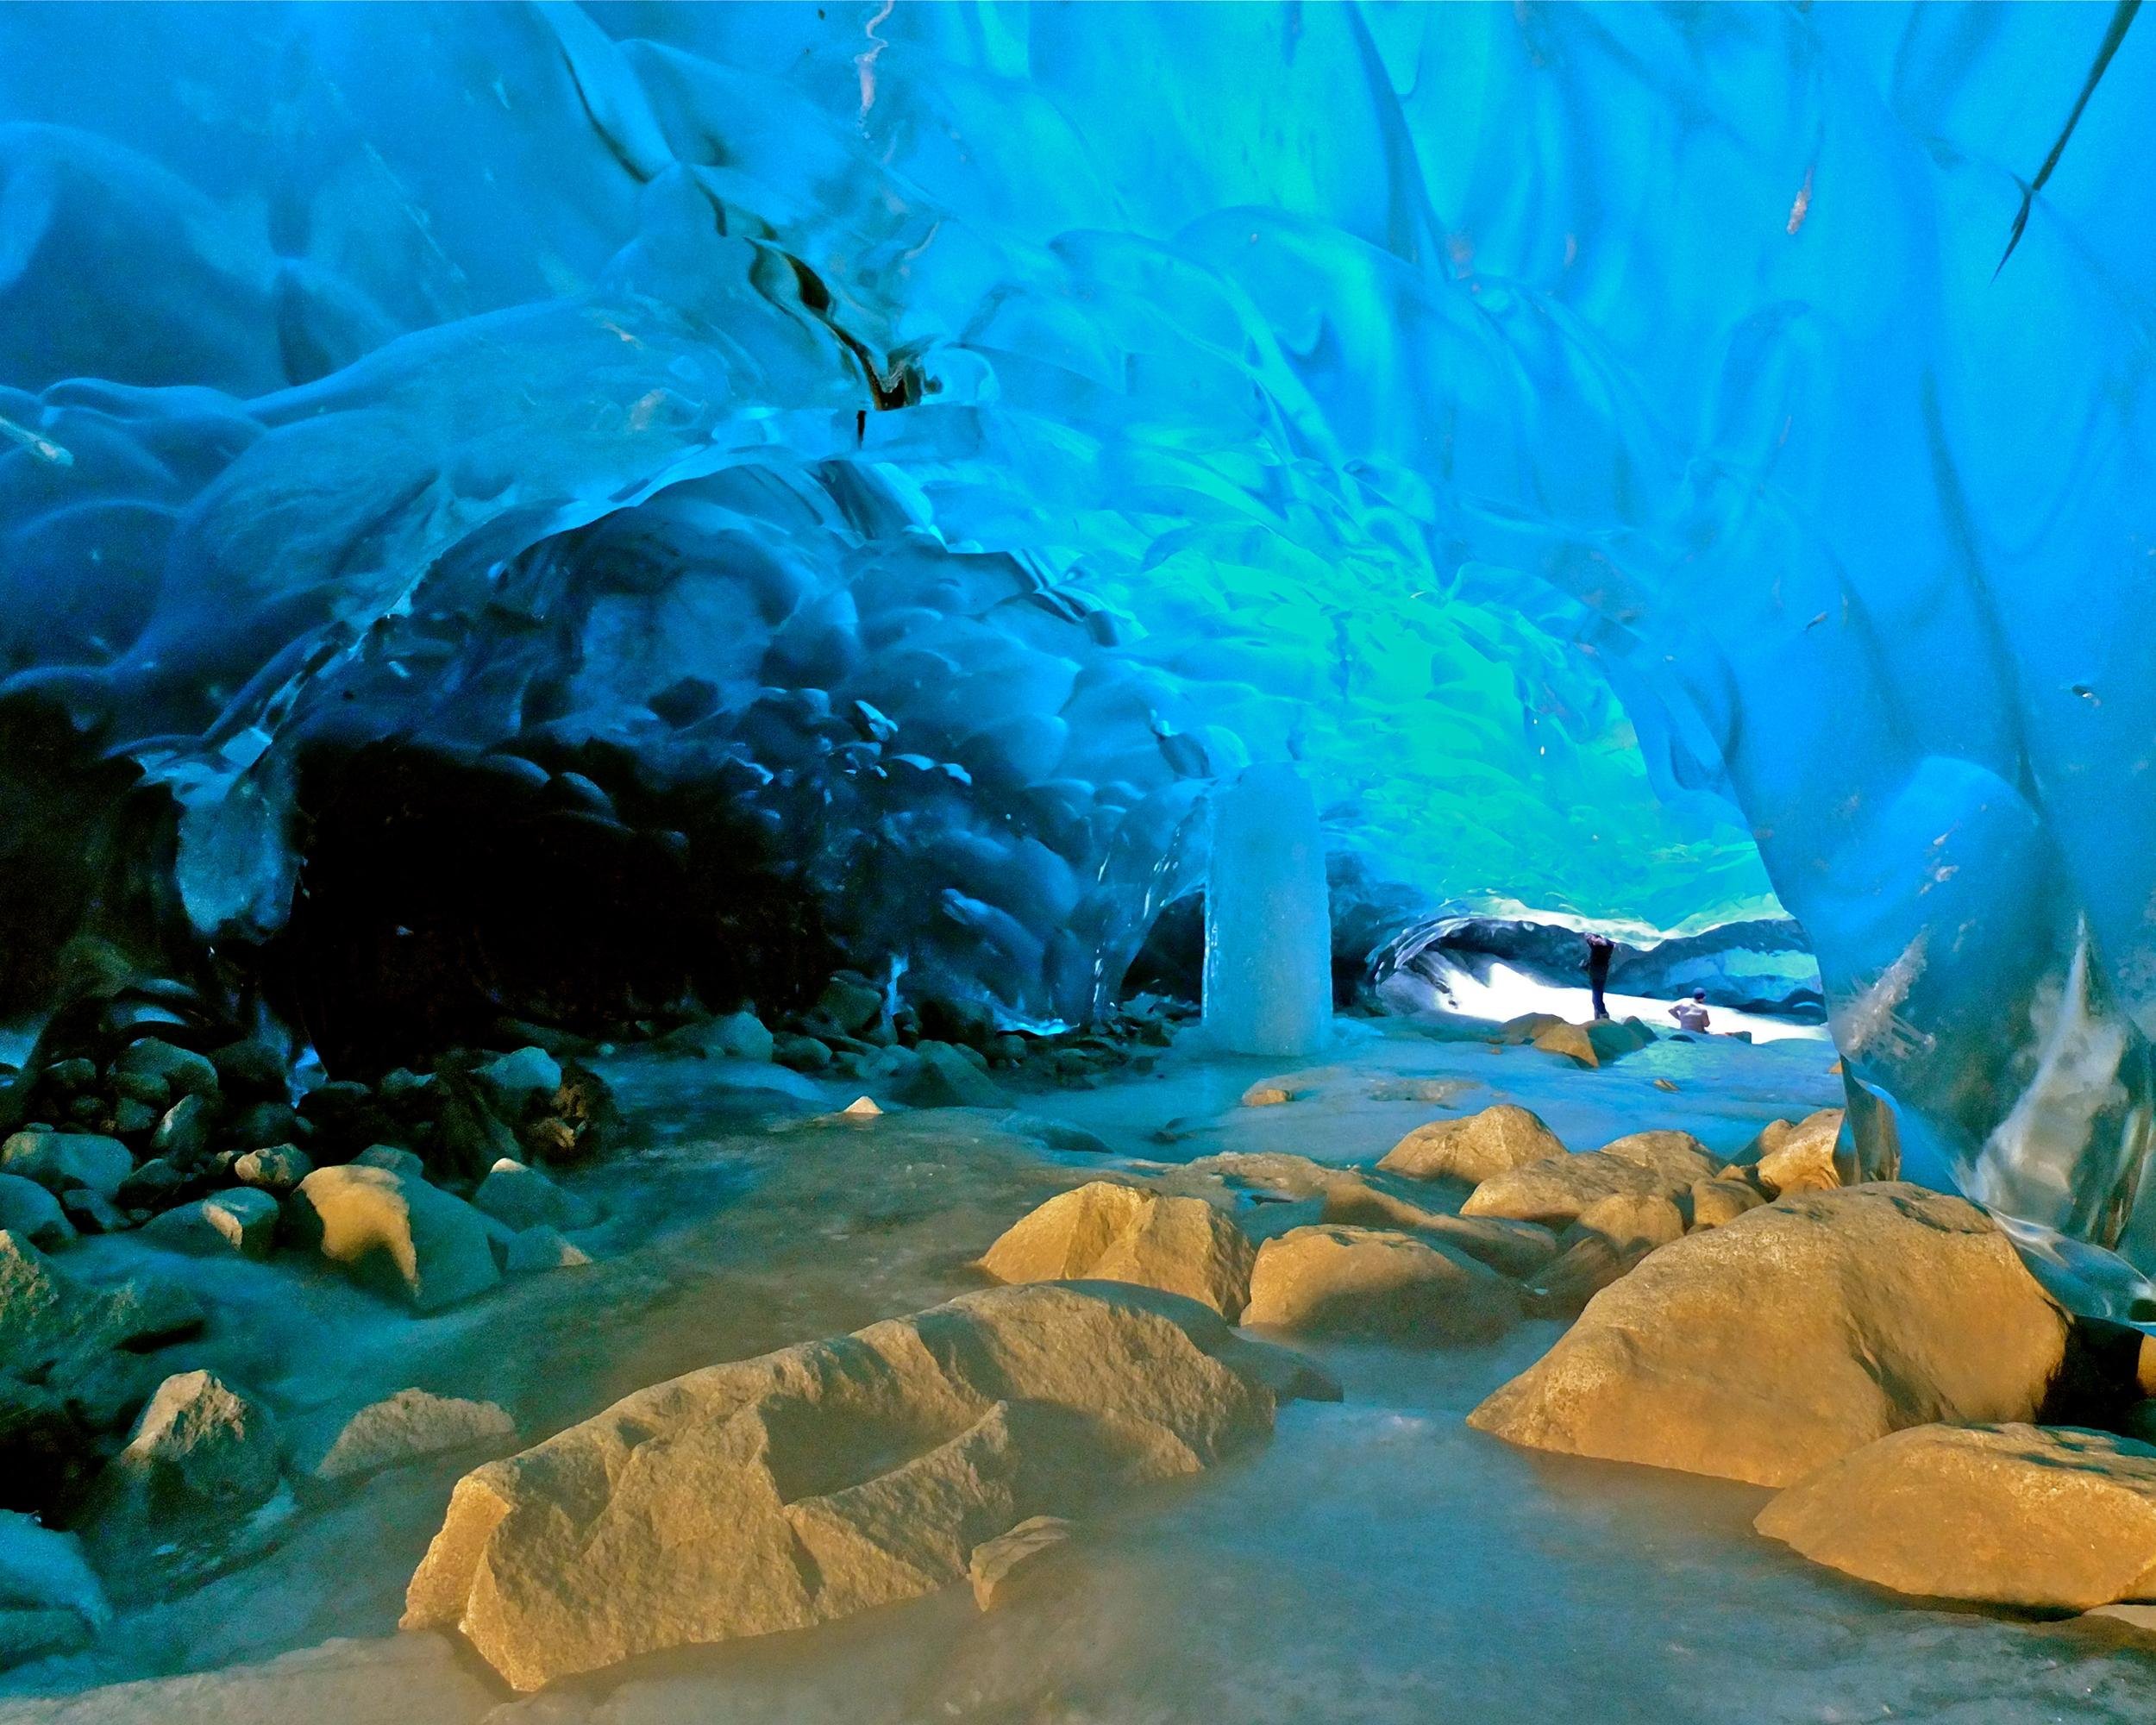 <p>Alaska boasts some of the most impressive vistas anywhere in the world. For a memorable selfie that captures an awesome outdoor adventure, hike to the Mendenhall Glacier ice cave in Juneau. Inside, the ice gives everything a bluish hue. Selfies look electric, with no filter necessary. But be warned: The <a href="https://www.adn.com/environment/article/popular-mendenhall-glacier-ice-cave-collapses/2014/07/19/">trek can be dangerous</a> and requires at least six to eight hours. </p>